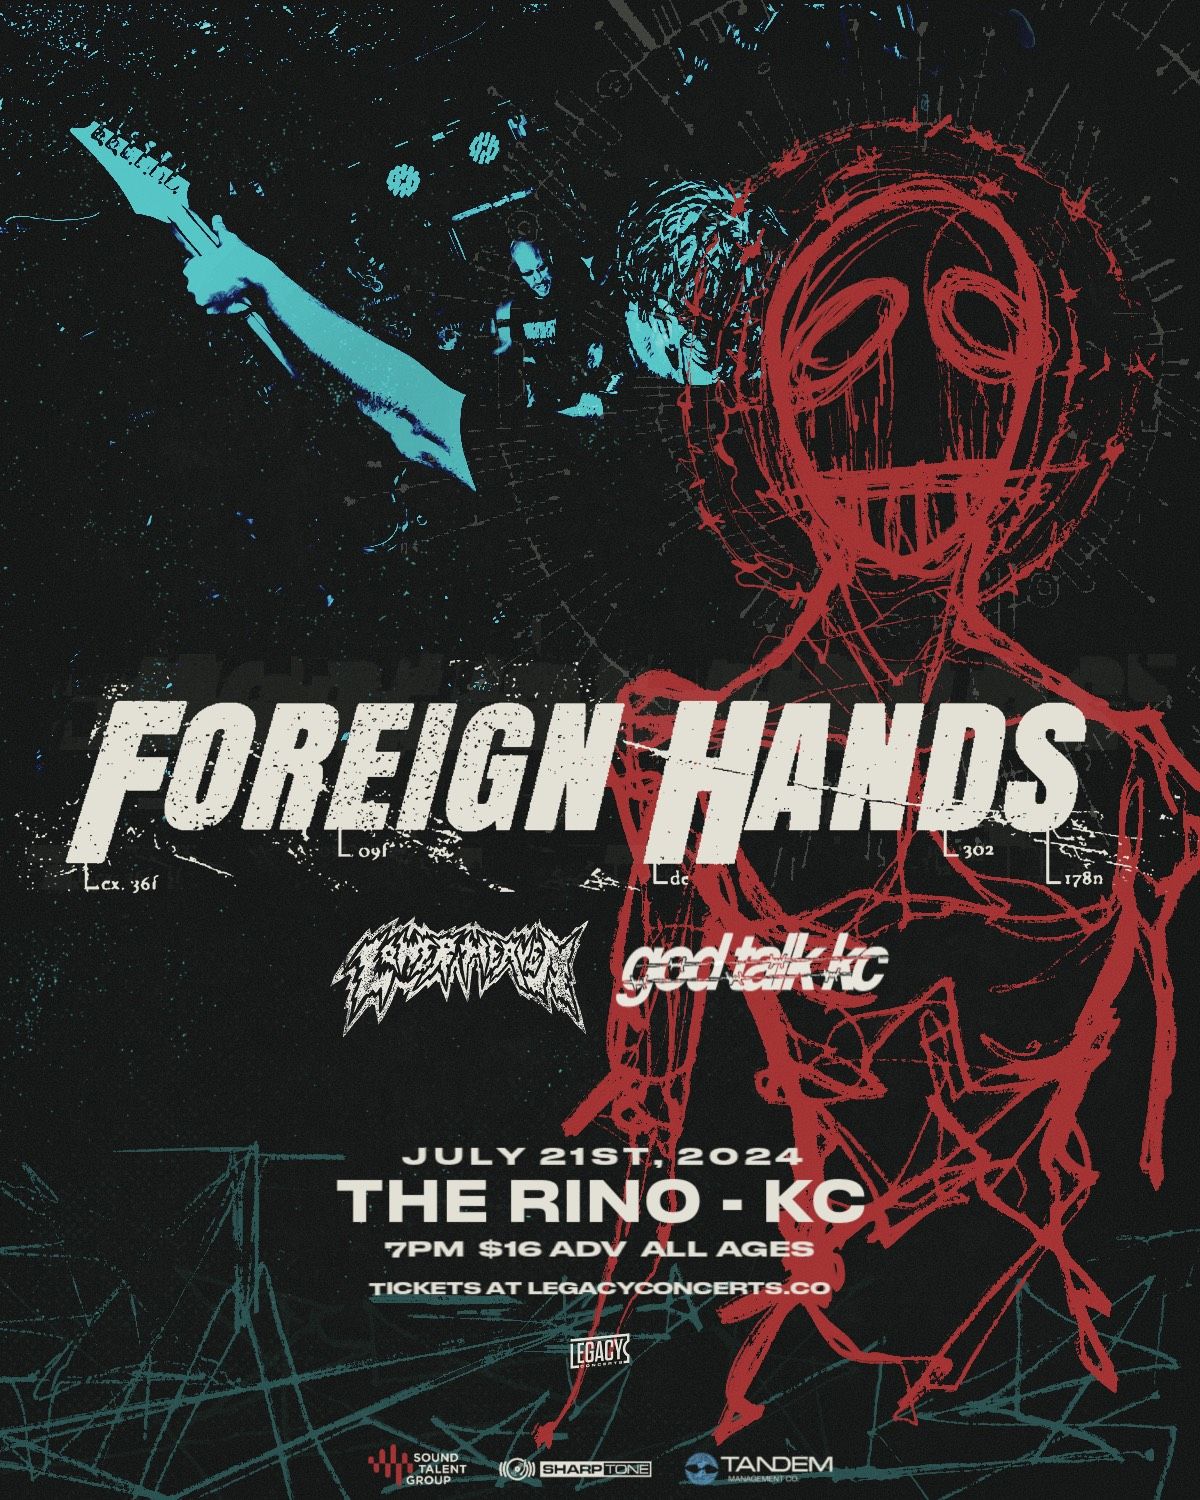 Foreign Hands at The Rino